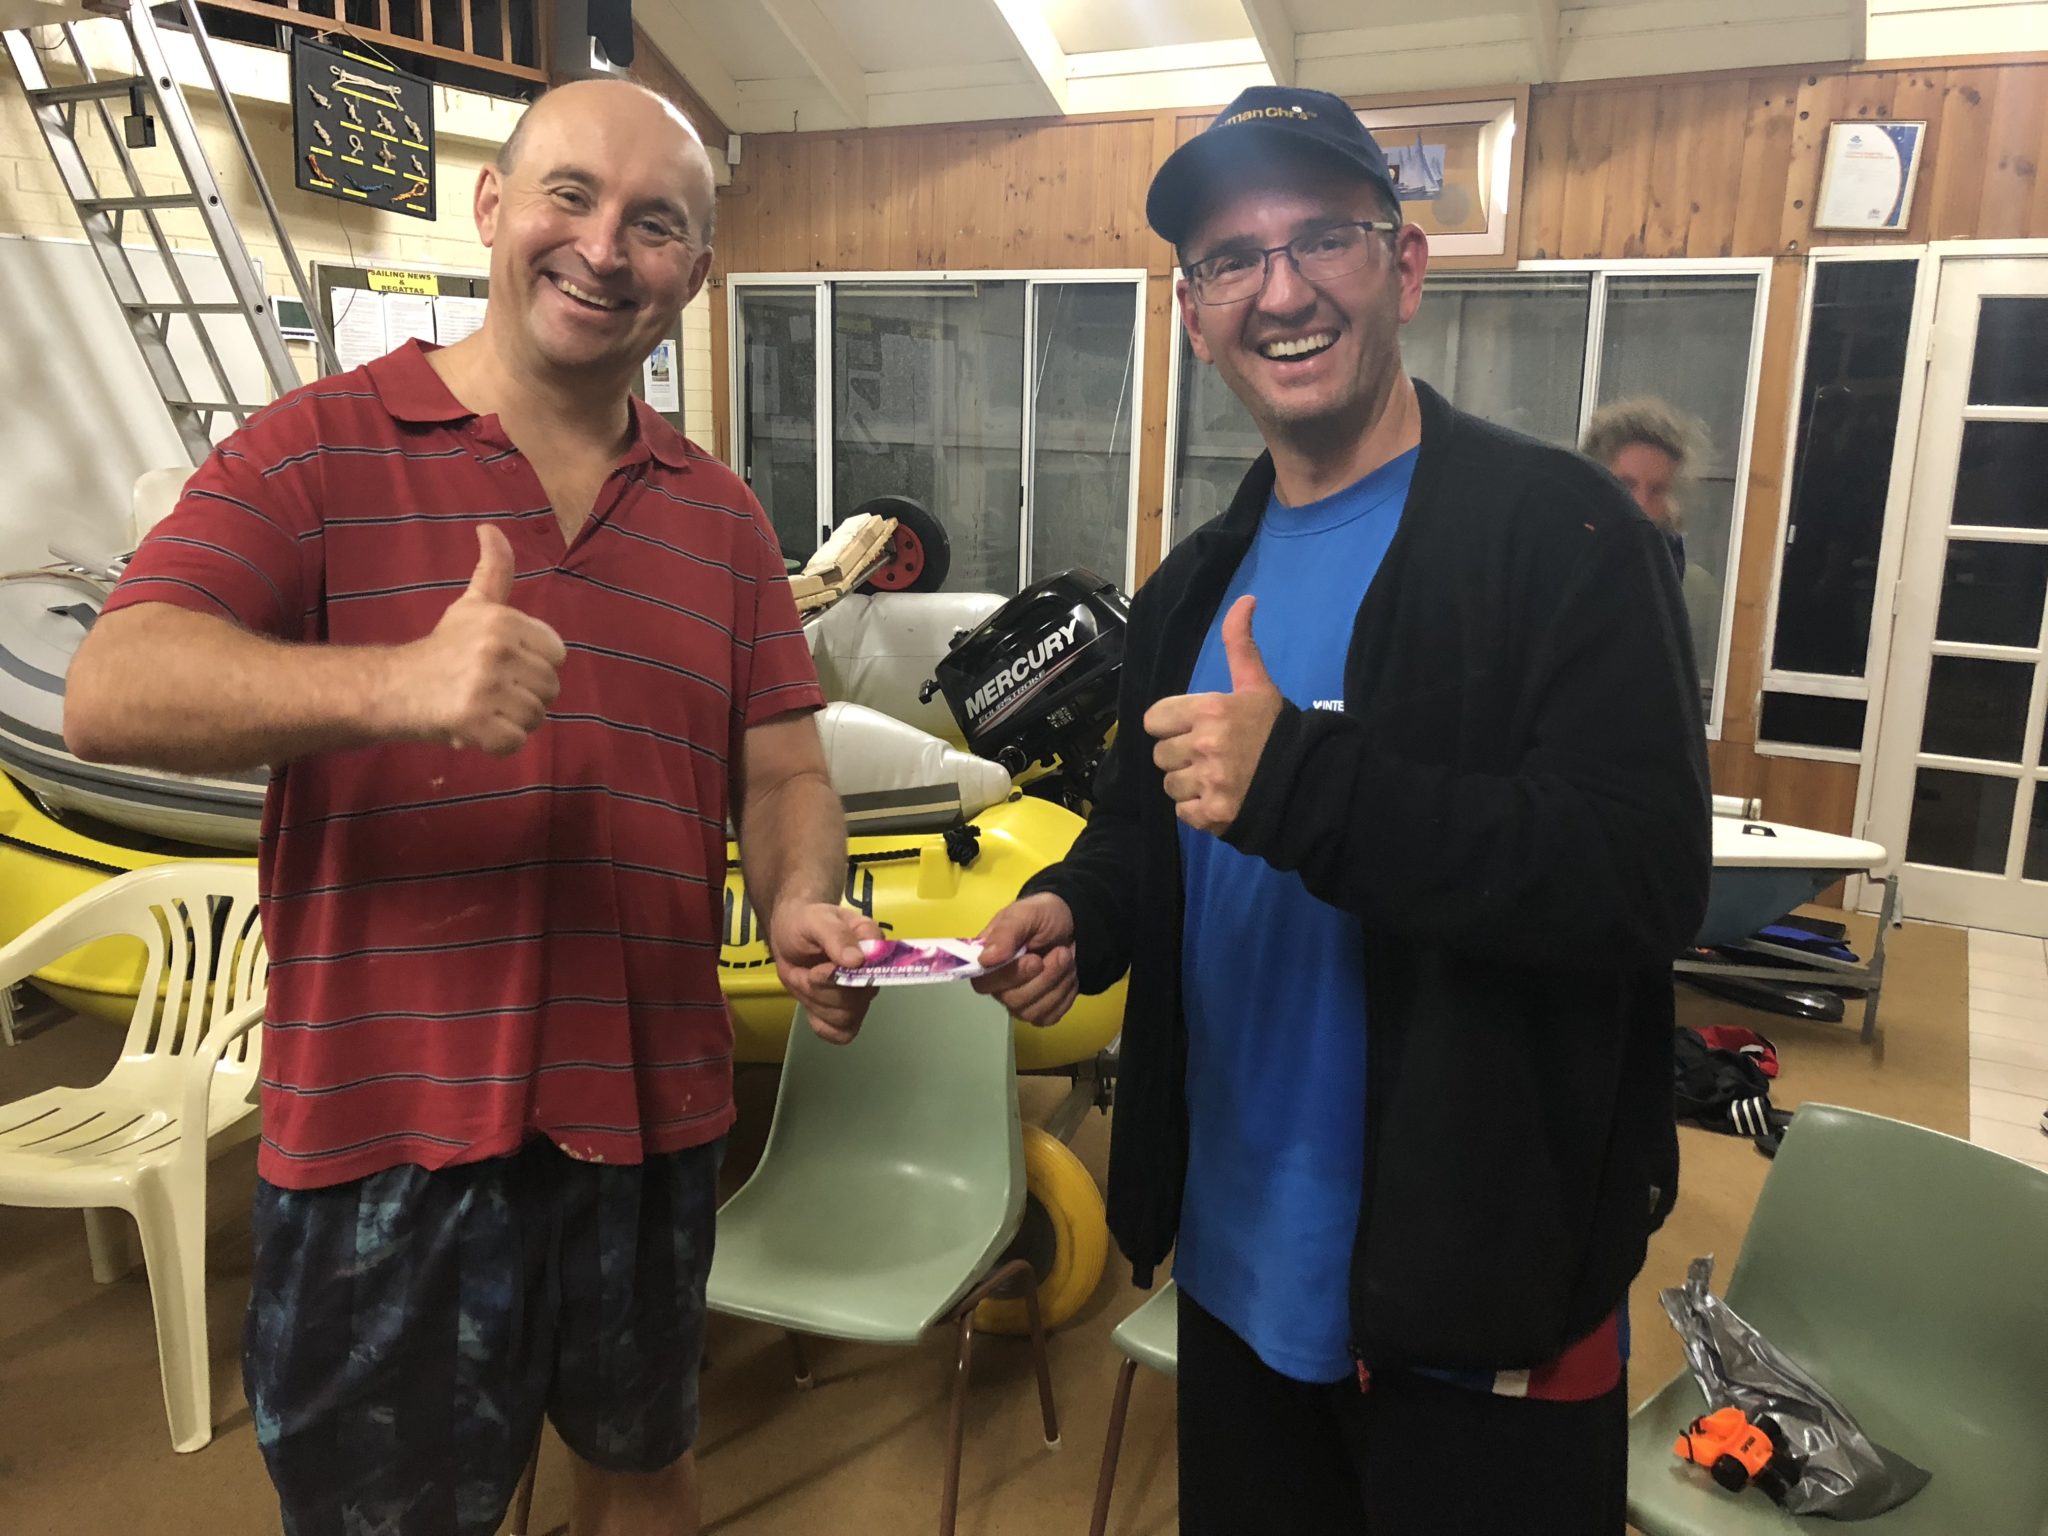 Tuesday 24th July 2018 : Tonight’s photo shows Chris Sawicki presenting Mike Galanty with a movie voucher